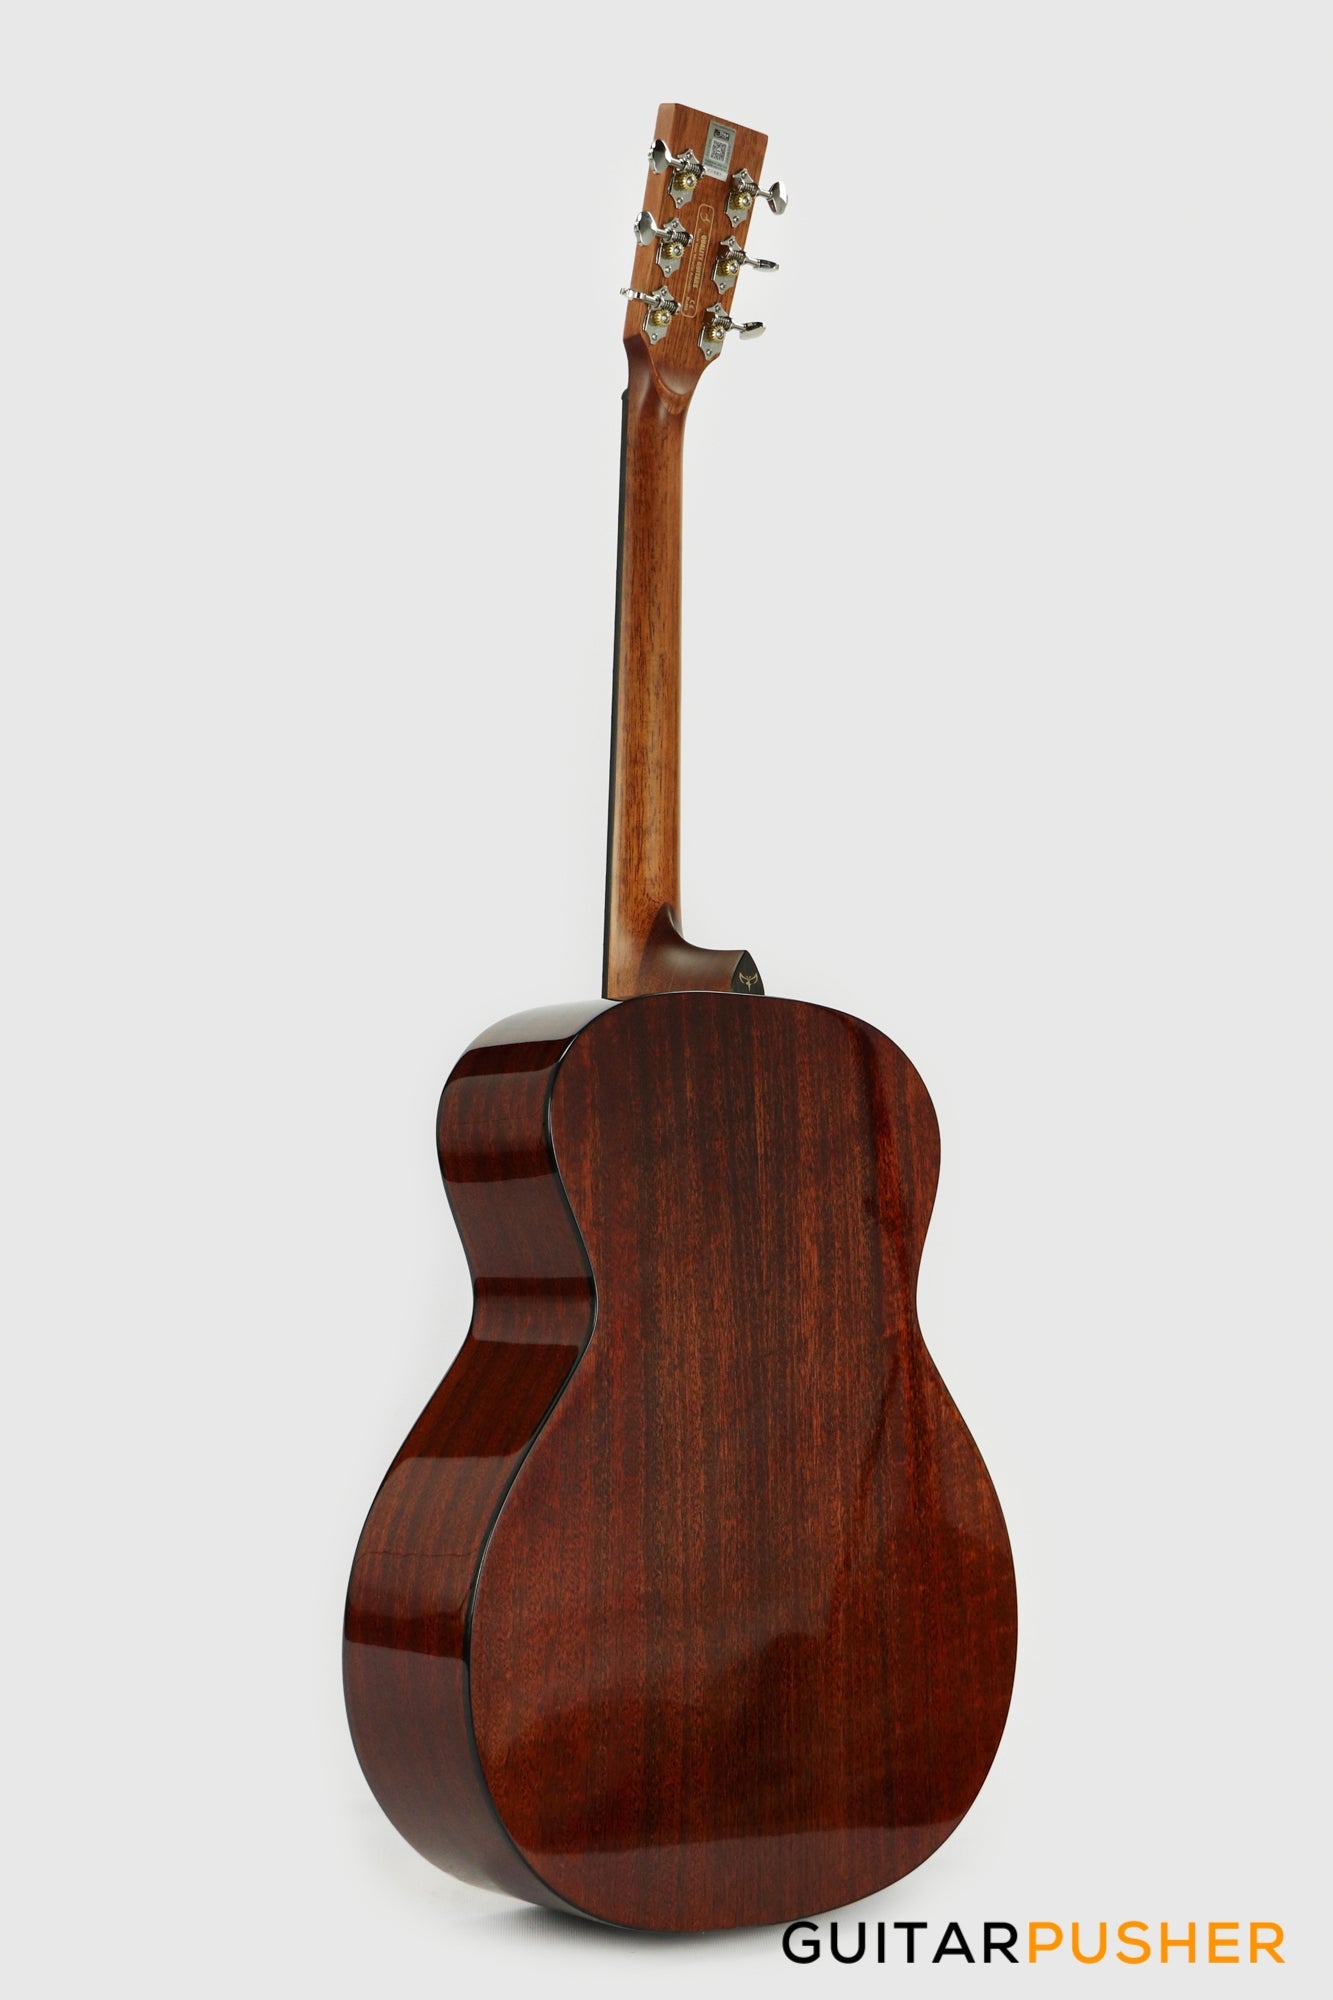 Tyma V-3 Stelliferous Era Solid Sitka Spruce Top Mahogany Auditorium Acoustic-Electric Guitar with Tyma T-200 Pickup